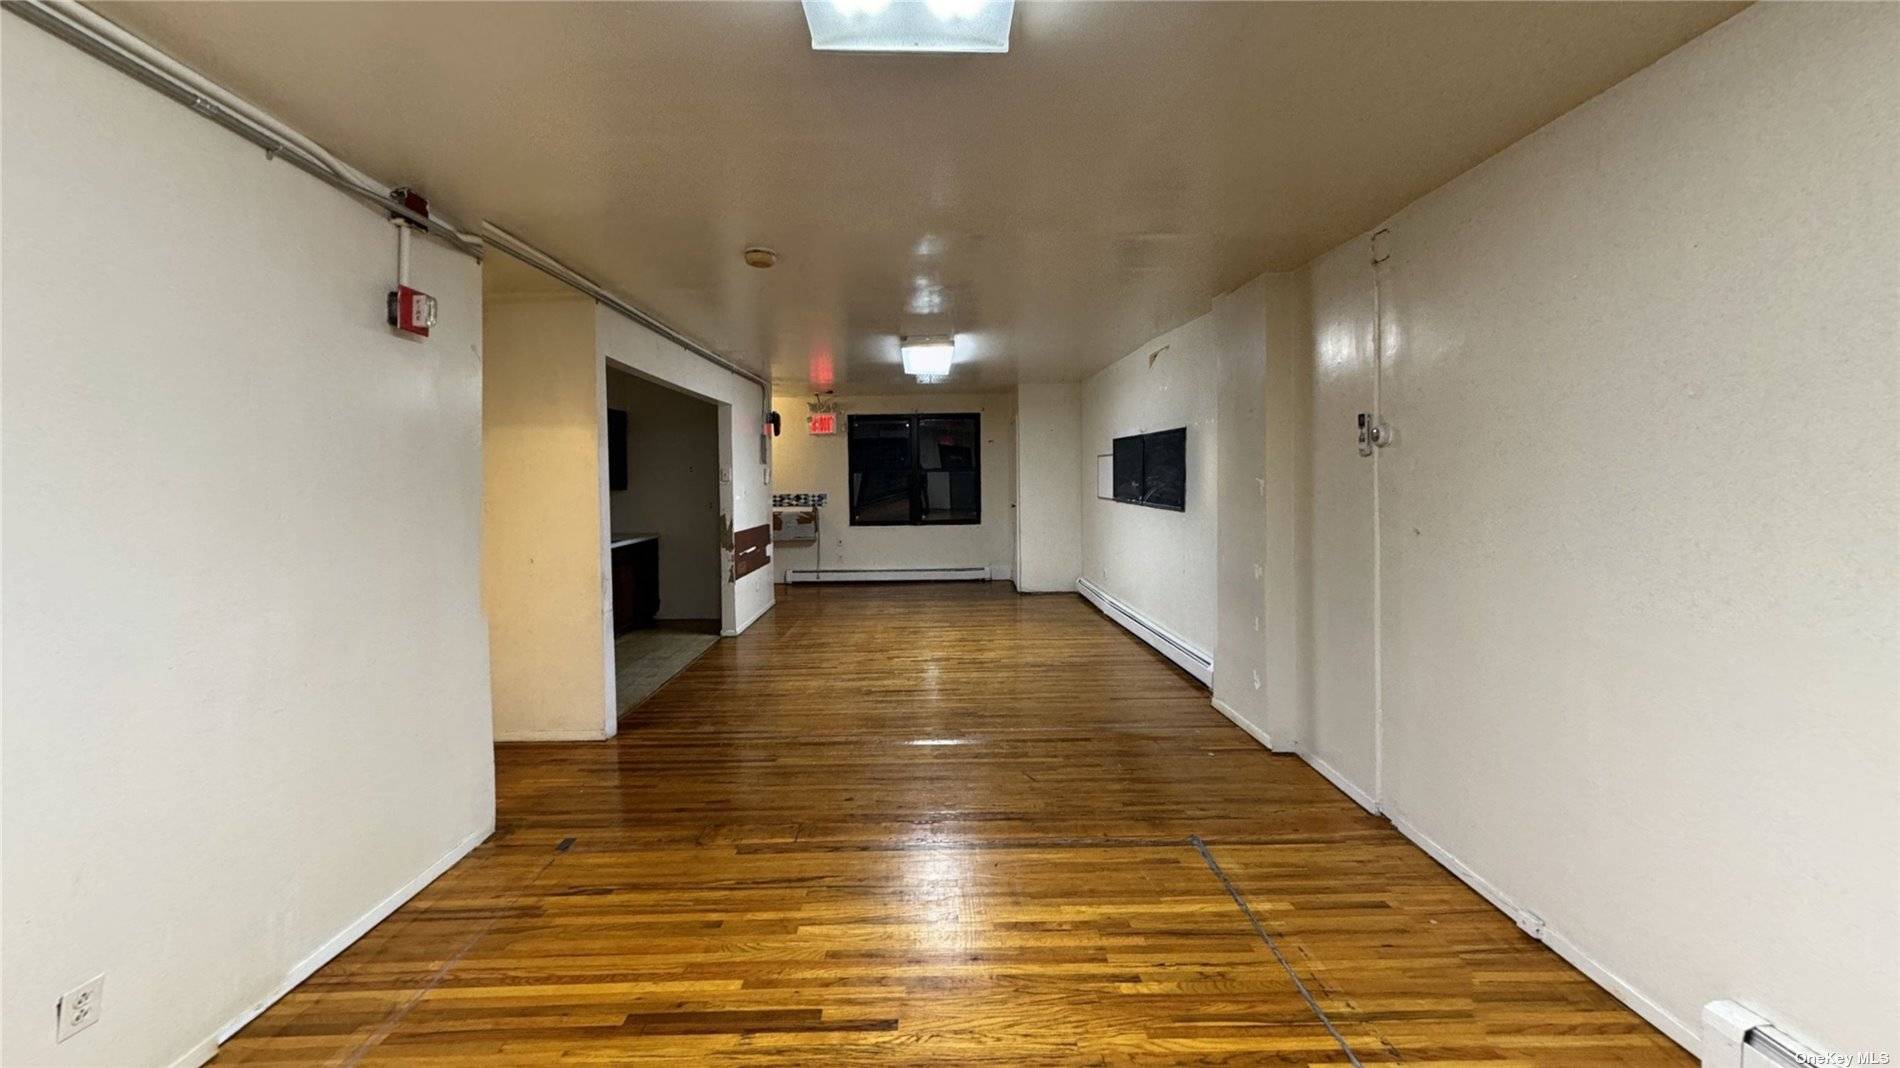 Welcome to Hillside Jamaica's Hottest spot Great opportunity to Lease an entire floor of approximately 1393 SF at the heart of Jamaica Hillside, within walking distance of every conceivable convenience ...